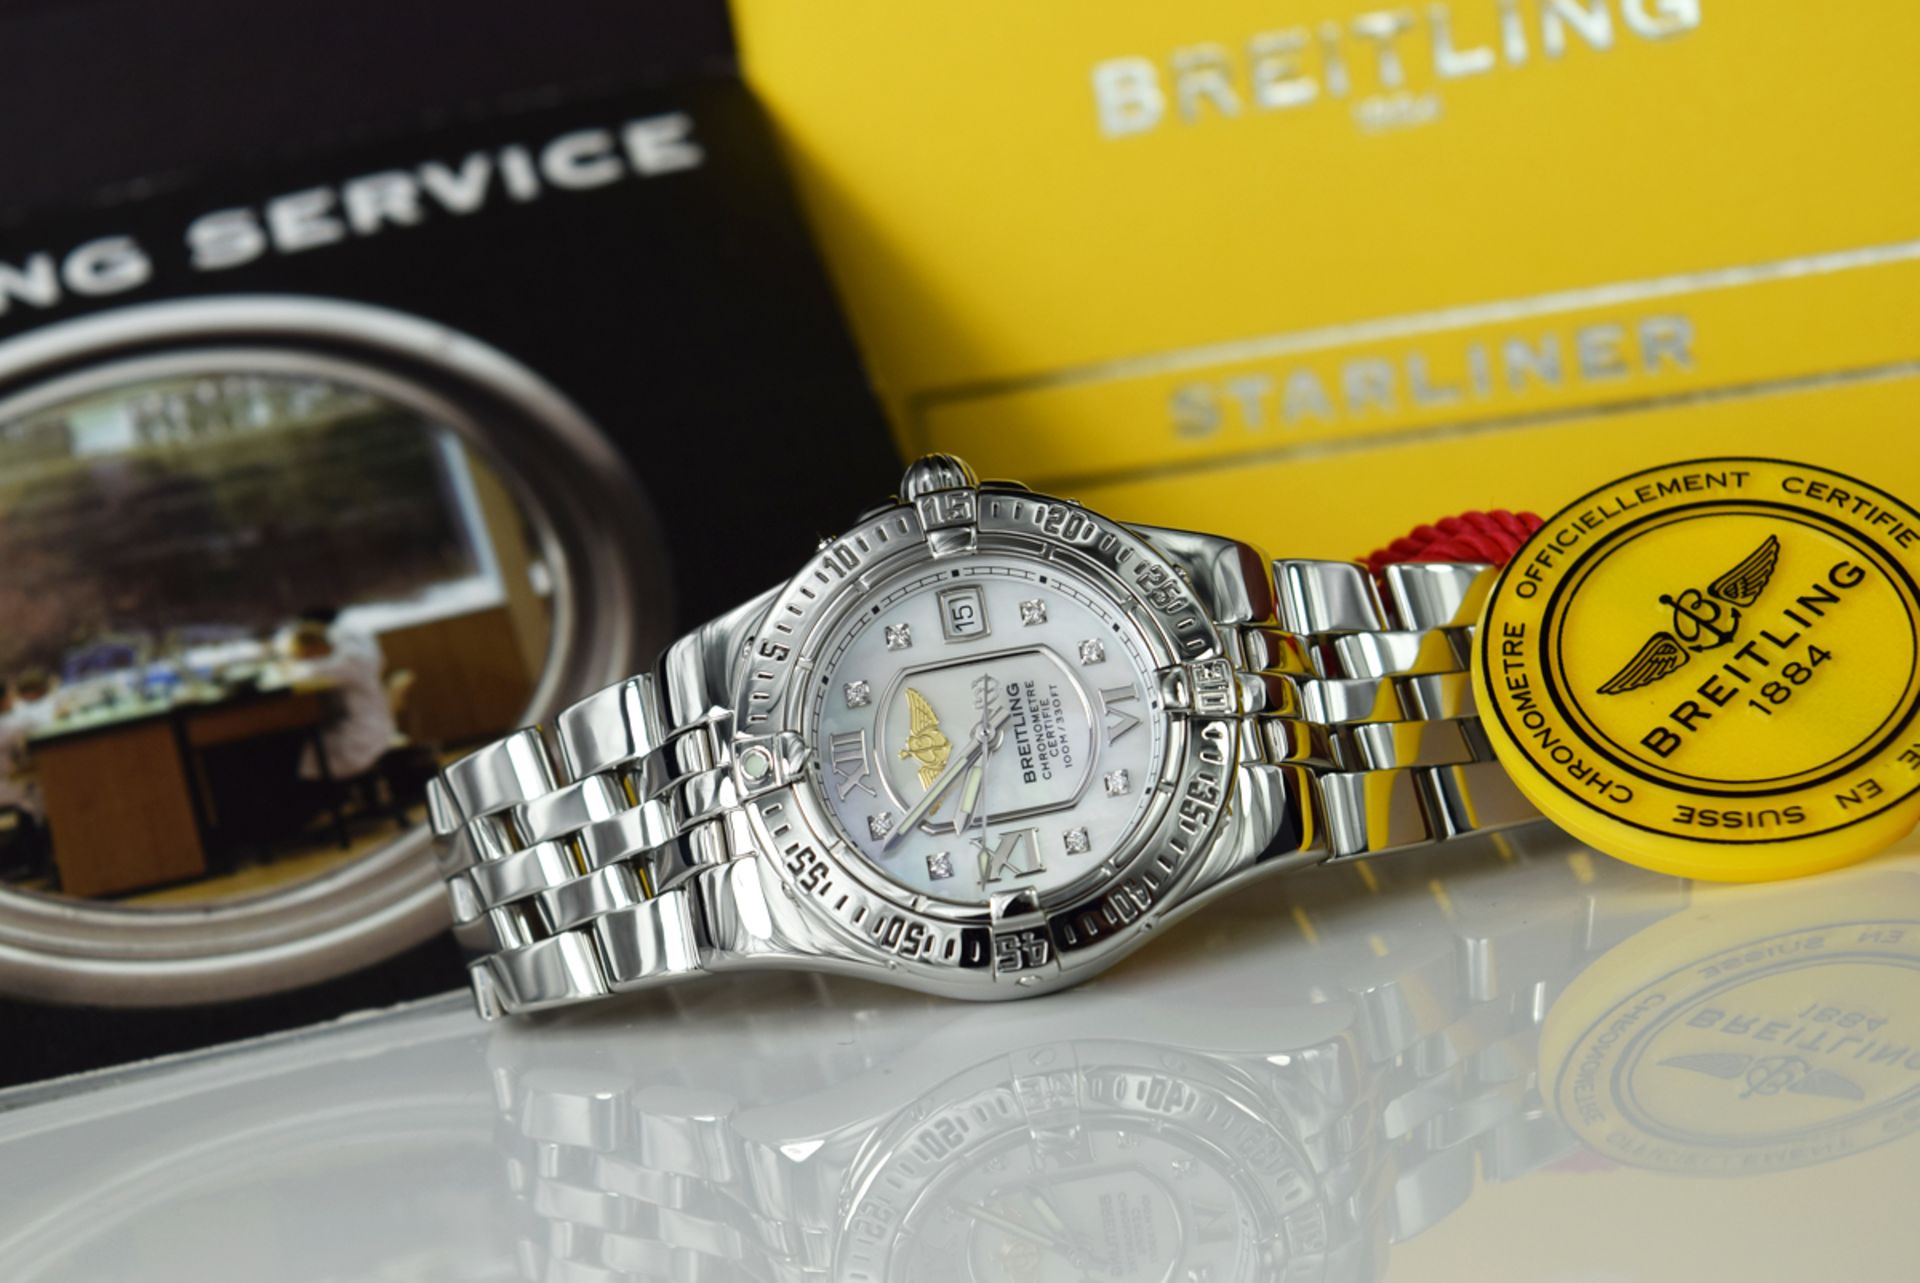 BREITLING - STARLINER 'A71340' - STEEL with DIAMOND DIAL! - Image 5 of 9